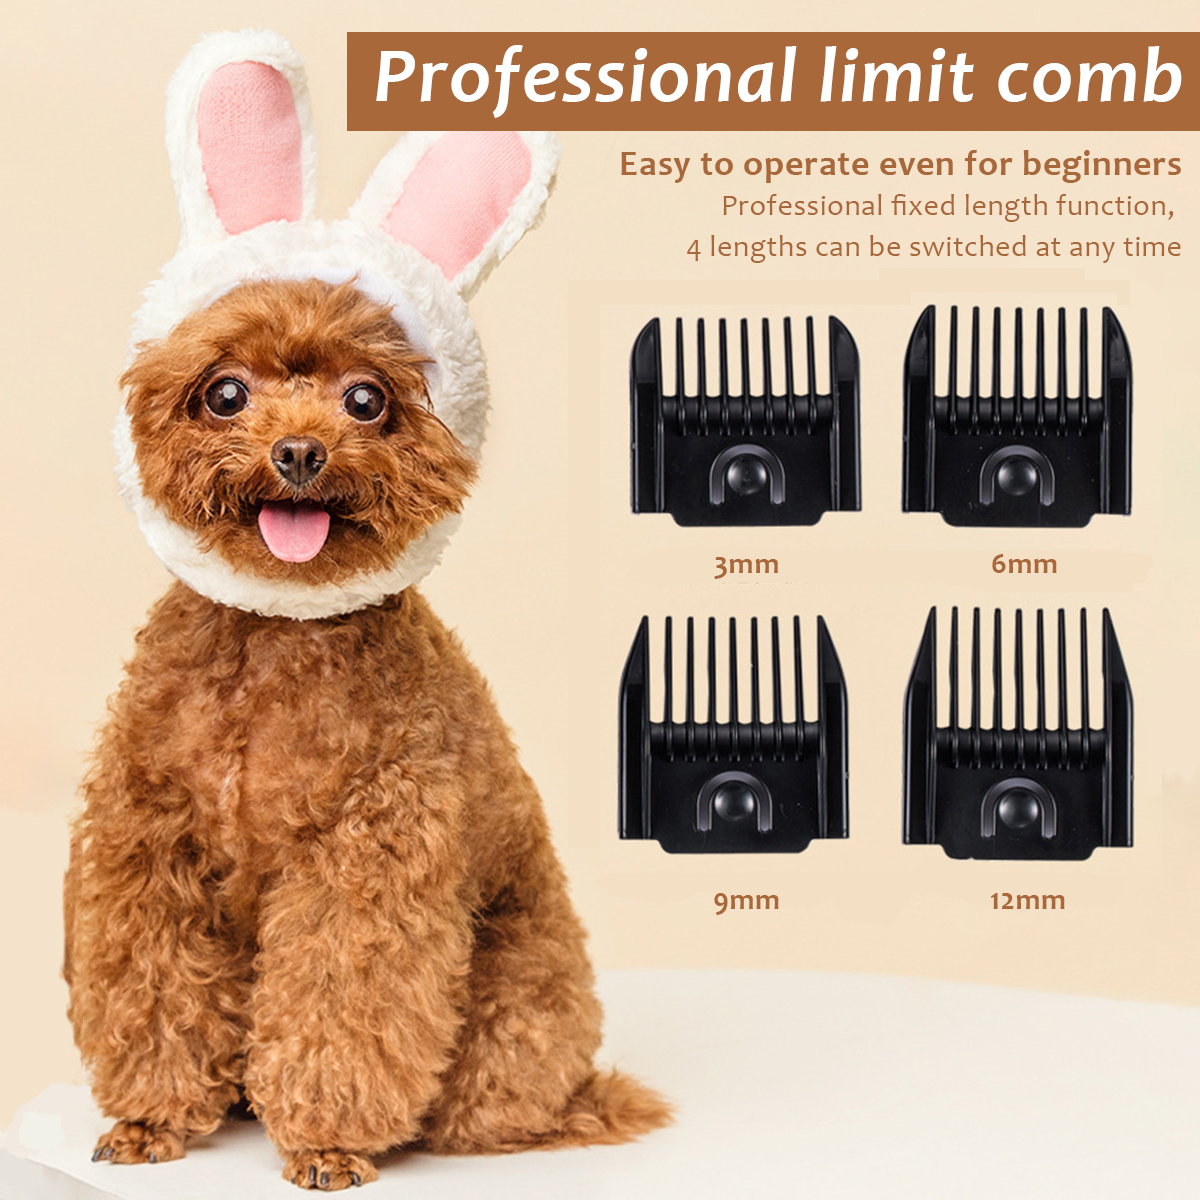 Professional-Pet-Dog-Cat-Animal-Clippers-Hair-Grooming-Cordless-Trimmer-Shaver-1958940-17